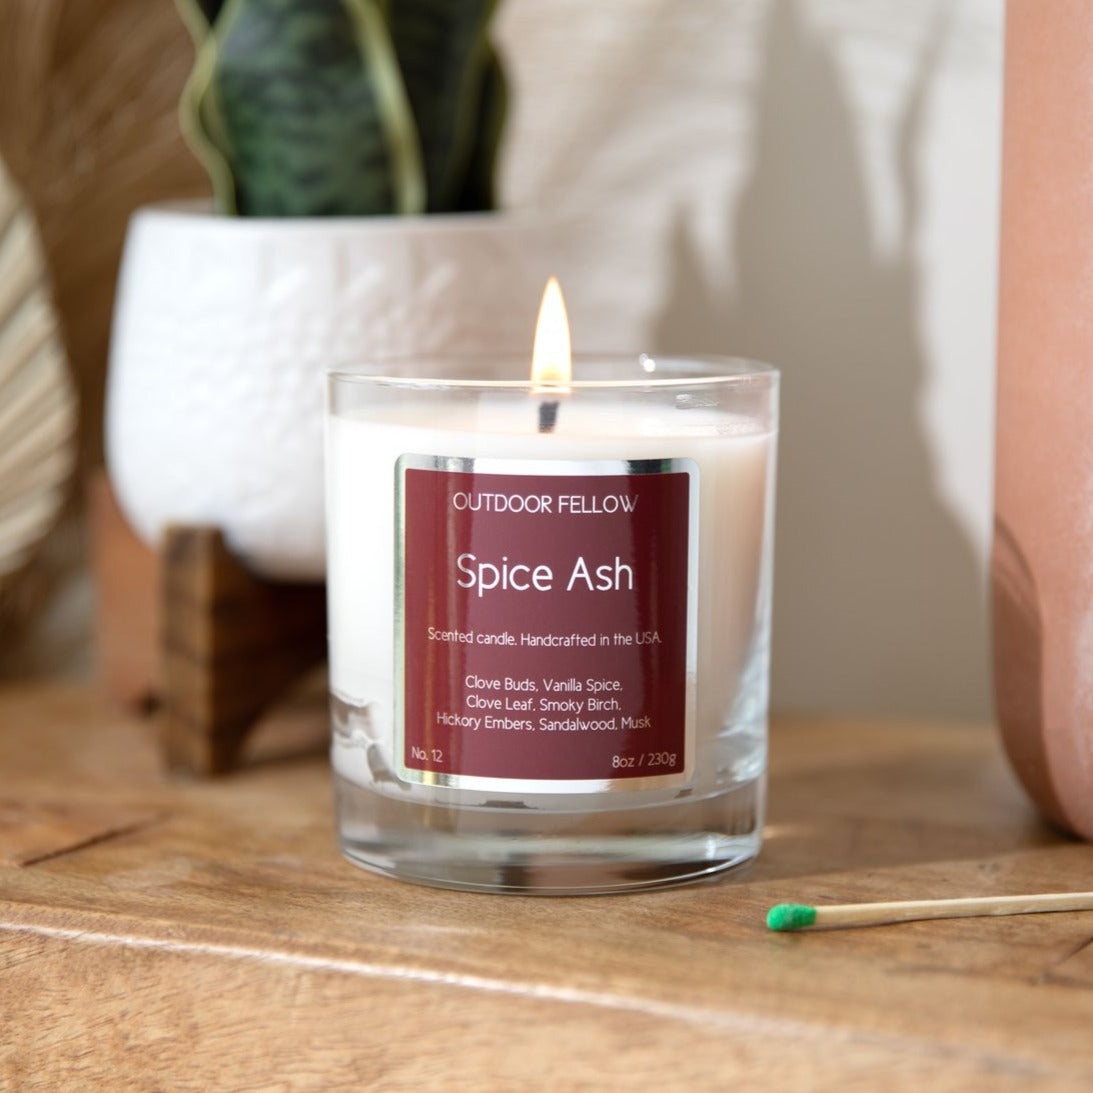 Spice Ash scented candle on a wooden bench with a single match stick in front of it